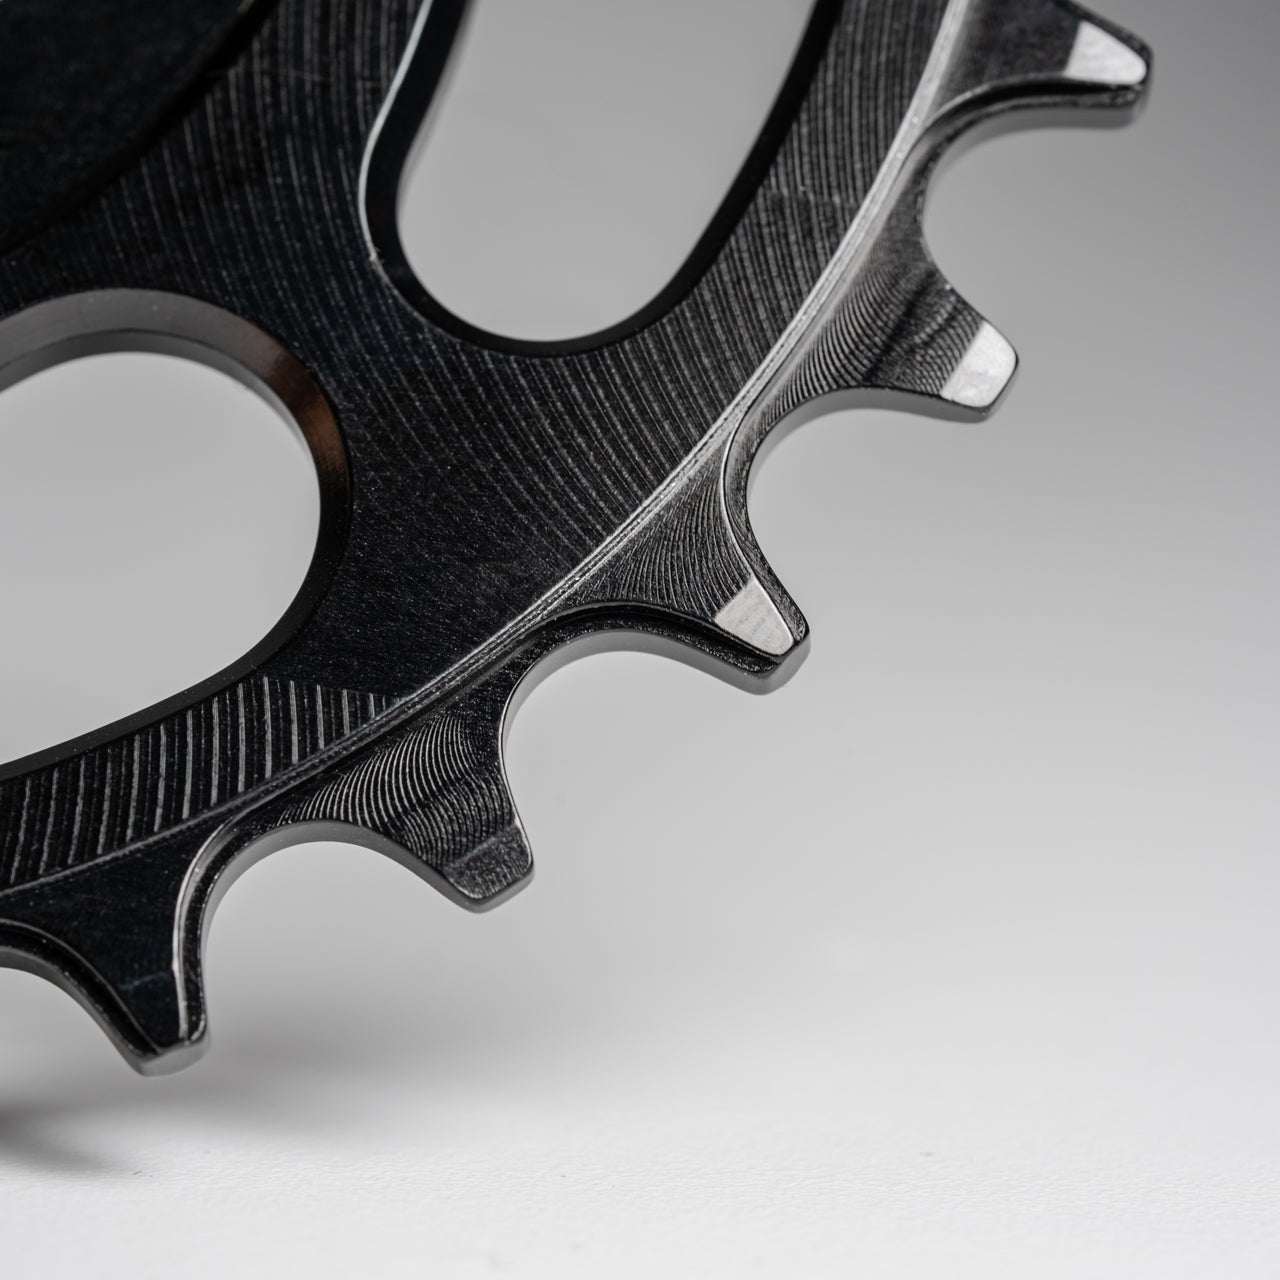 Race Face Cinch Boost direct mount chainring teeth machining detail